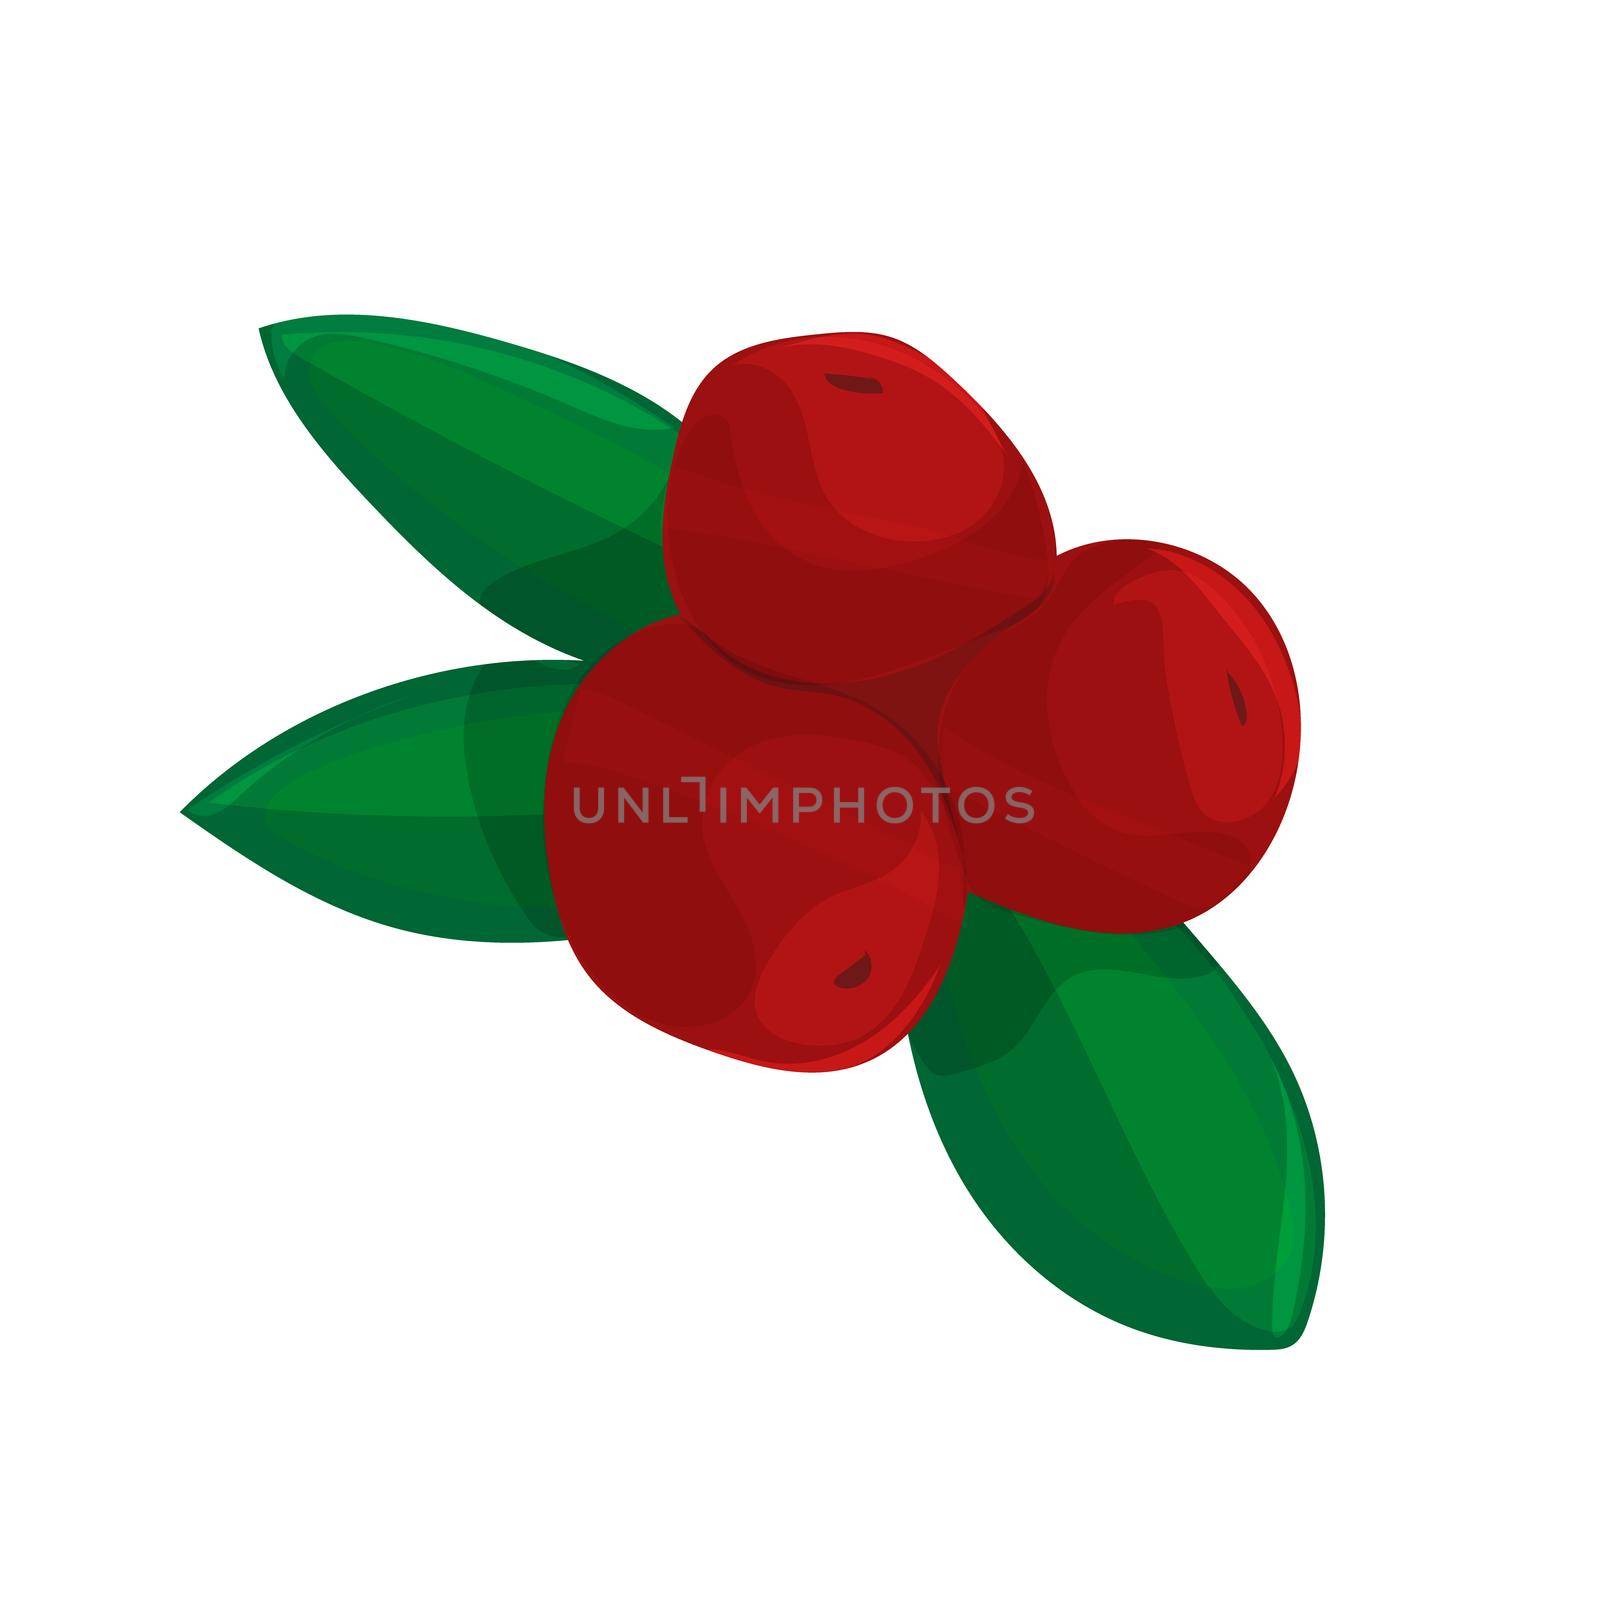 Red berries with green leaves cartoon isolated illustration on white